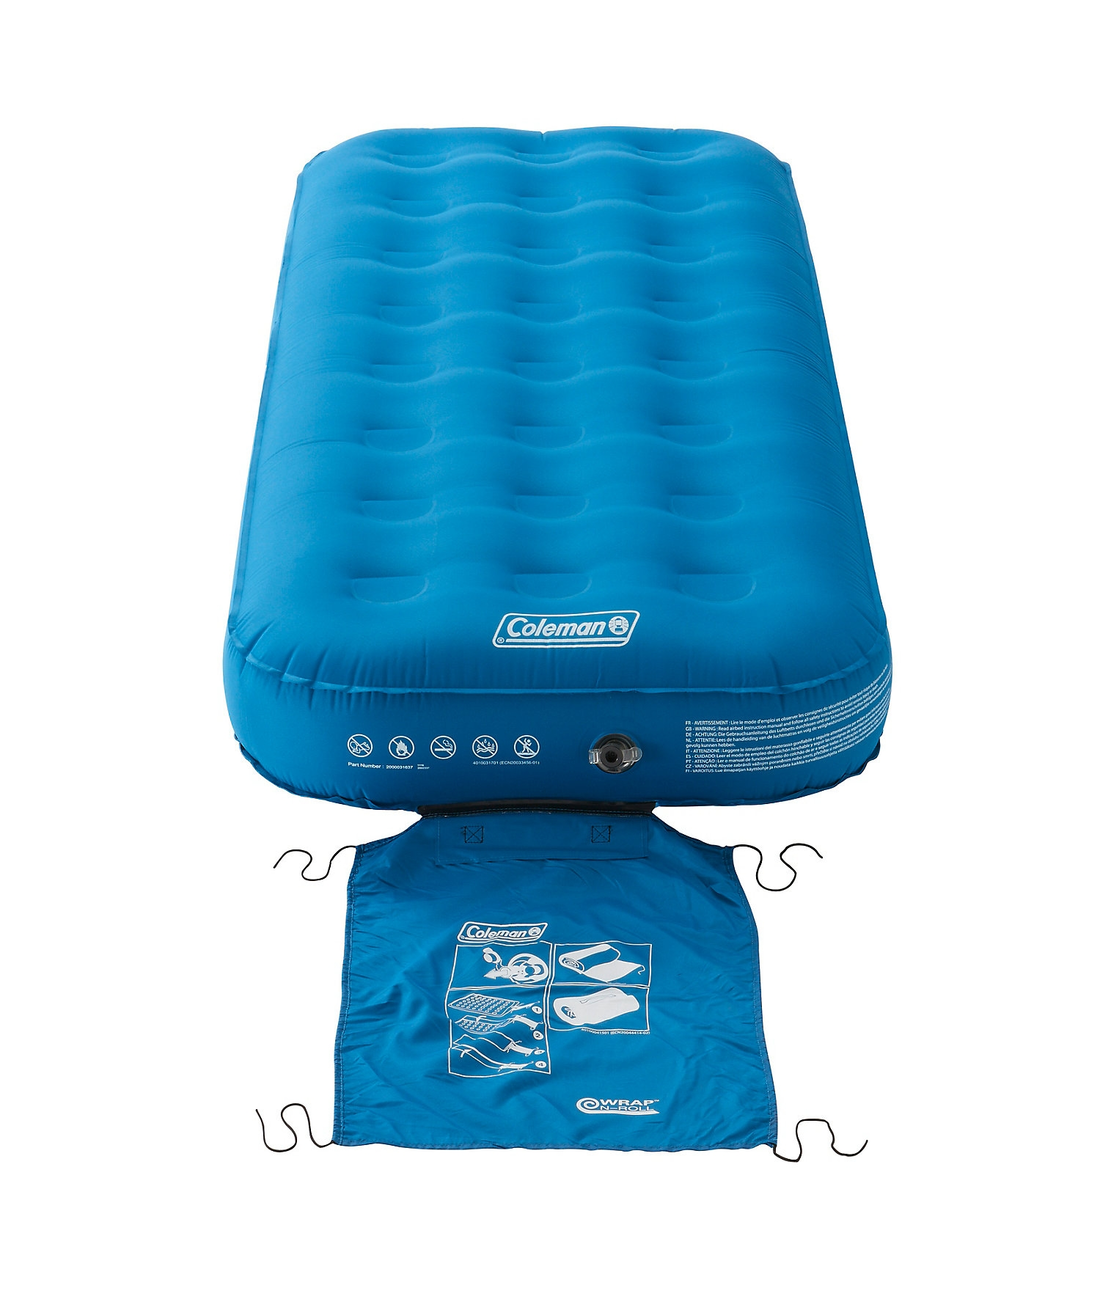 Extra Durable Airbed